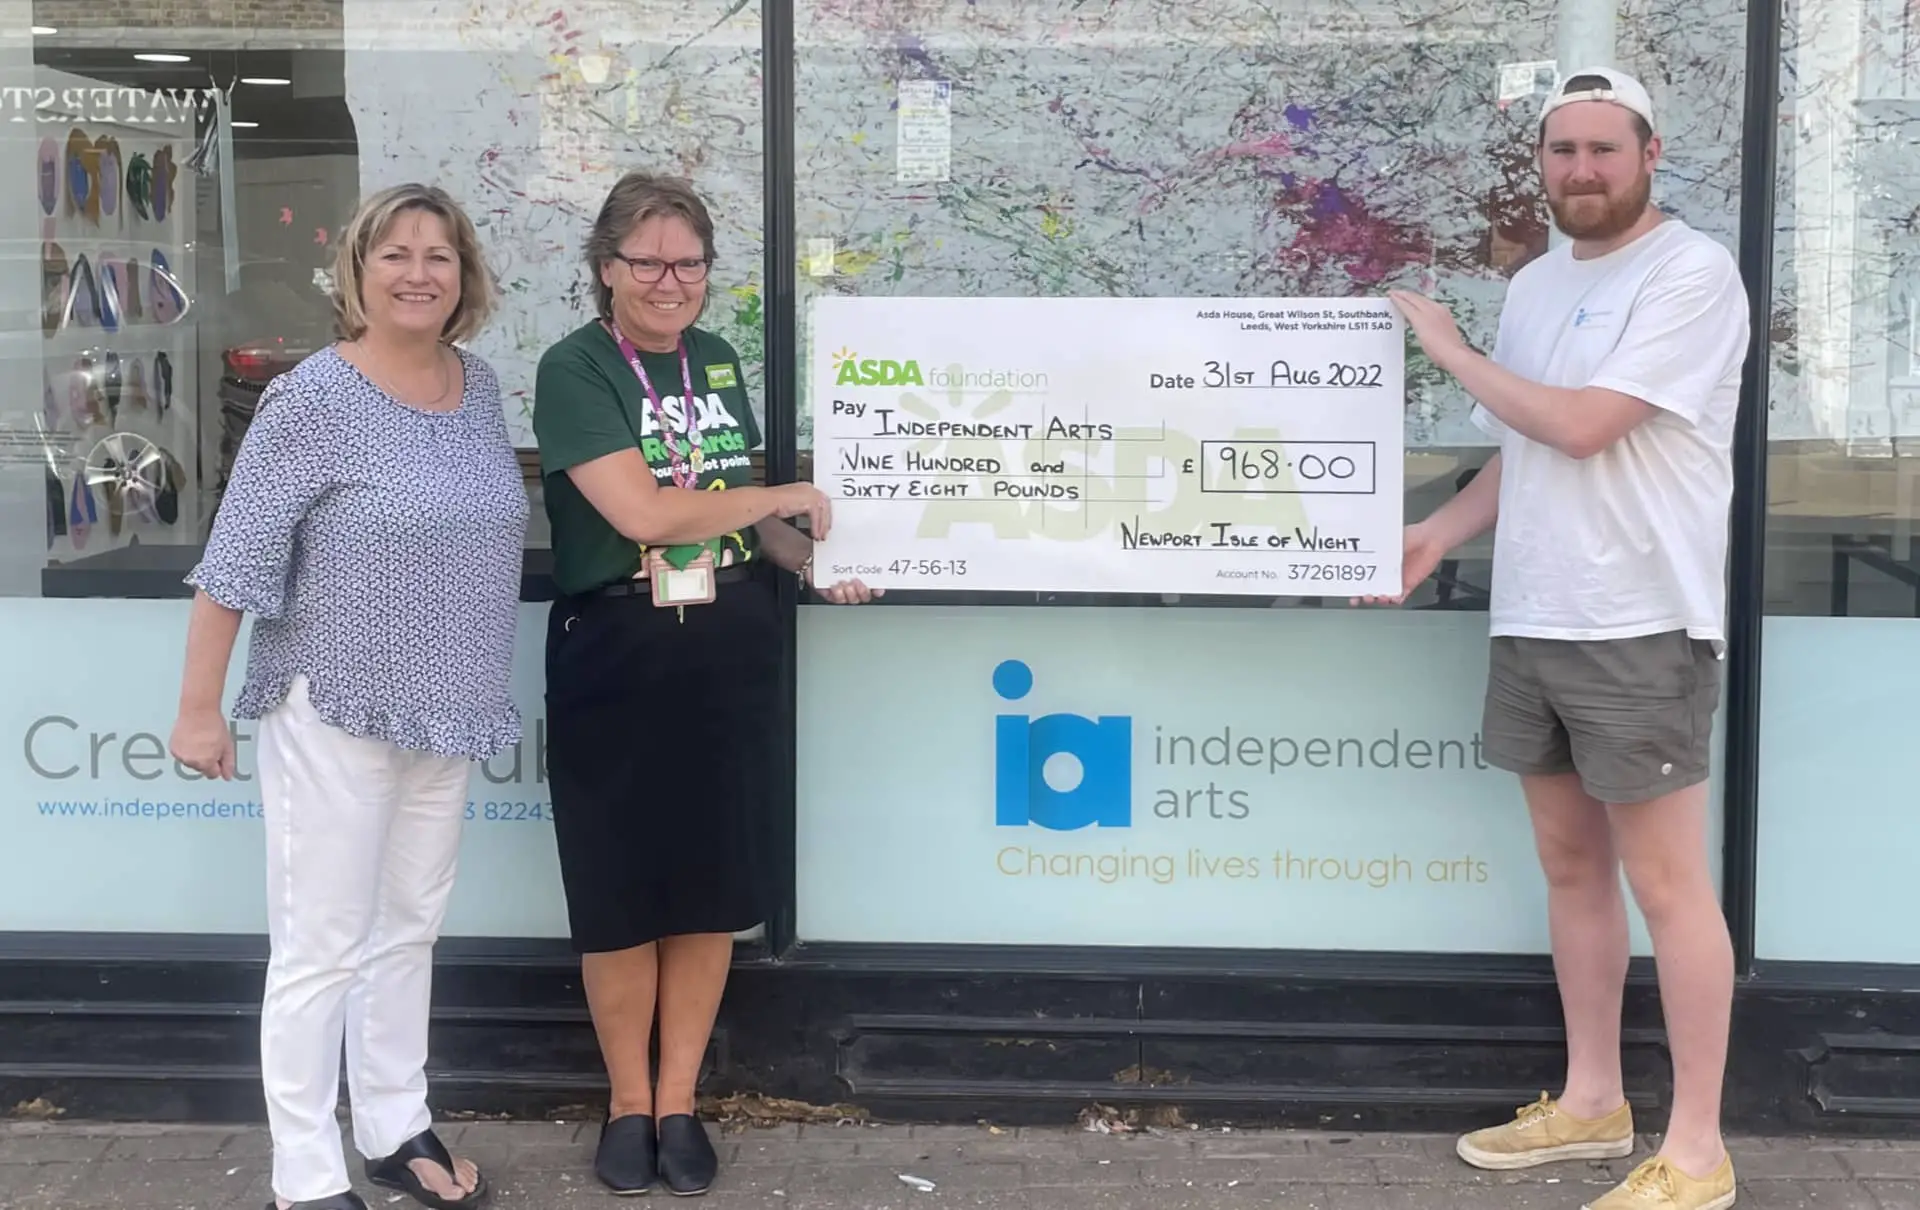 (L-R) Independent Arts Chief Executive Lisa Gagliani MBE, Asda Community Champion Clare Jones, Independent Arts Fundraiser Ralph Ridler